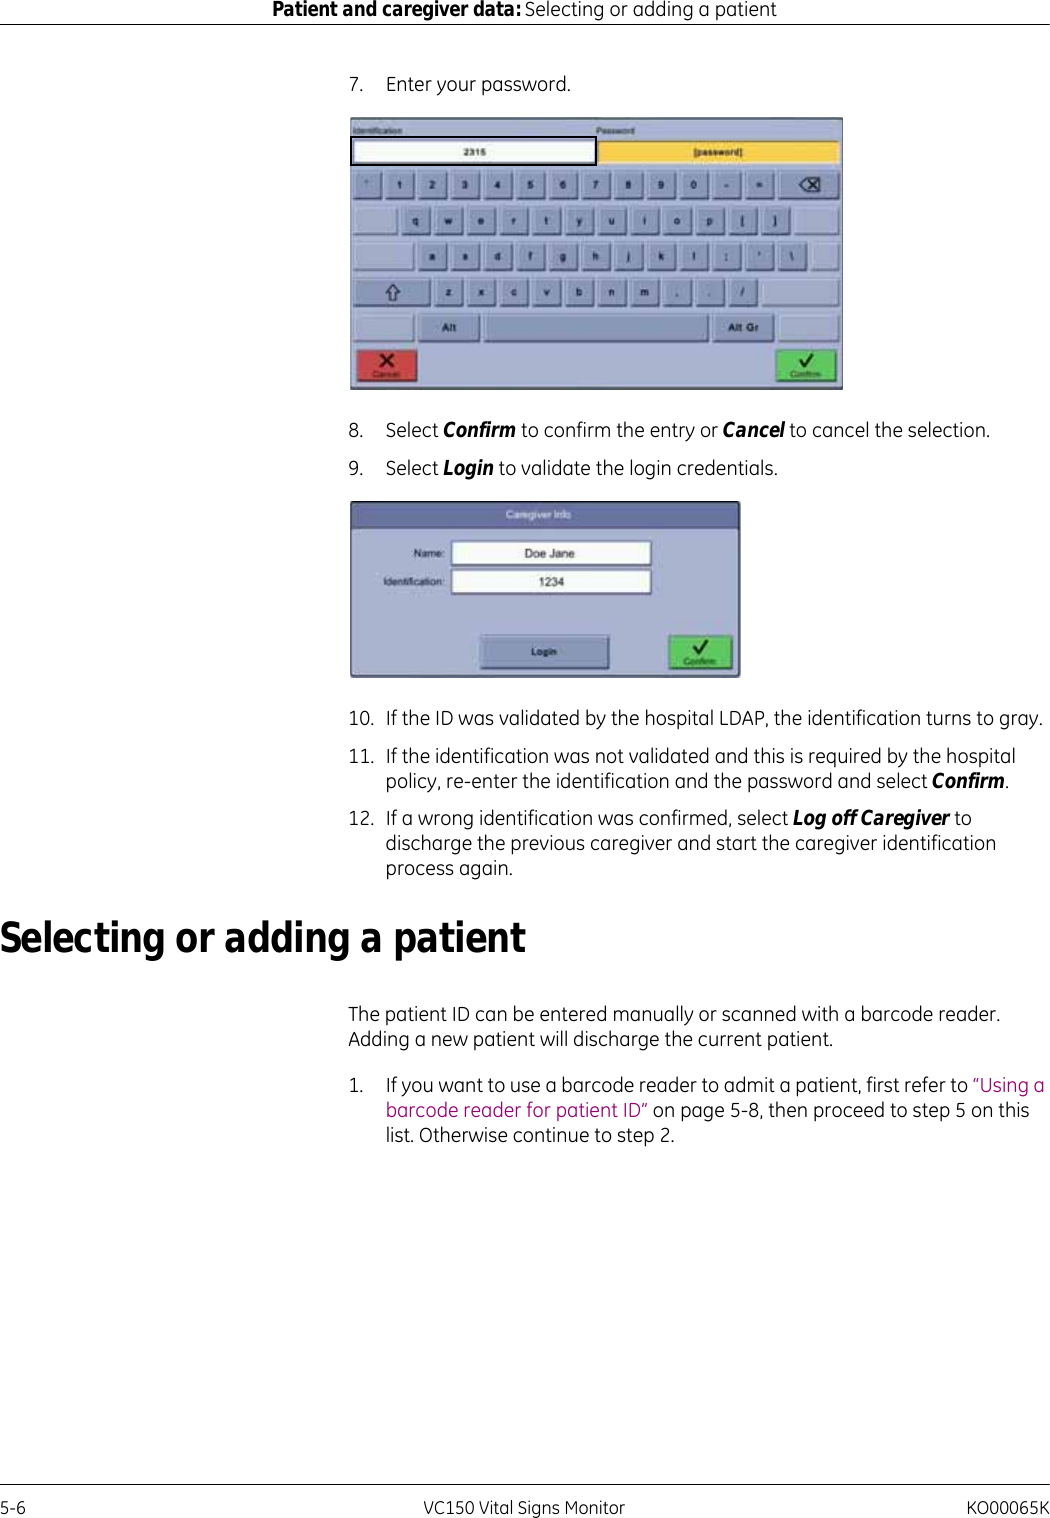 5-6 VC150 Vital Signs Monitor KO00065KPatient and caregiver data: Selecting or adding a patient7. Enter your password.8. Select Confirm to confirm the entry or Cancel to cancel the selection.9. Select Login to validate the login credentials.10. If the ID was validated by the hospital LDAP, the identification turns to gray.11. If the identification was not validated and this is required by the hospital policy, re-enter the identification and the password and select Confirm.12. If a wrong identification was confirmed, select Log off Caregiver to discharge the previous caregiver and start the caregiver identification process again.Selecting or adding a patientThe patient ID can be entered manually or scanned with a barcode reader. Adding a new patient will discharge the current patient.1. If you want to use a barcode reader to admit a patient, first refer to “Using a barcode reader for patient ID” on page 5-8, then proceed to step 5 on this list. Otherwise continue to step 2.